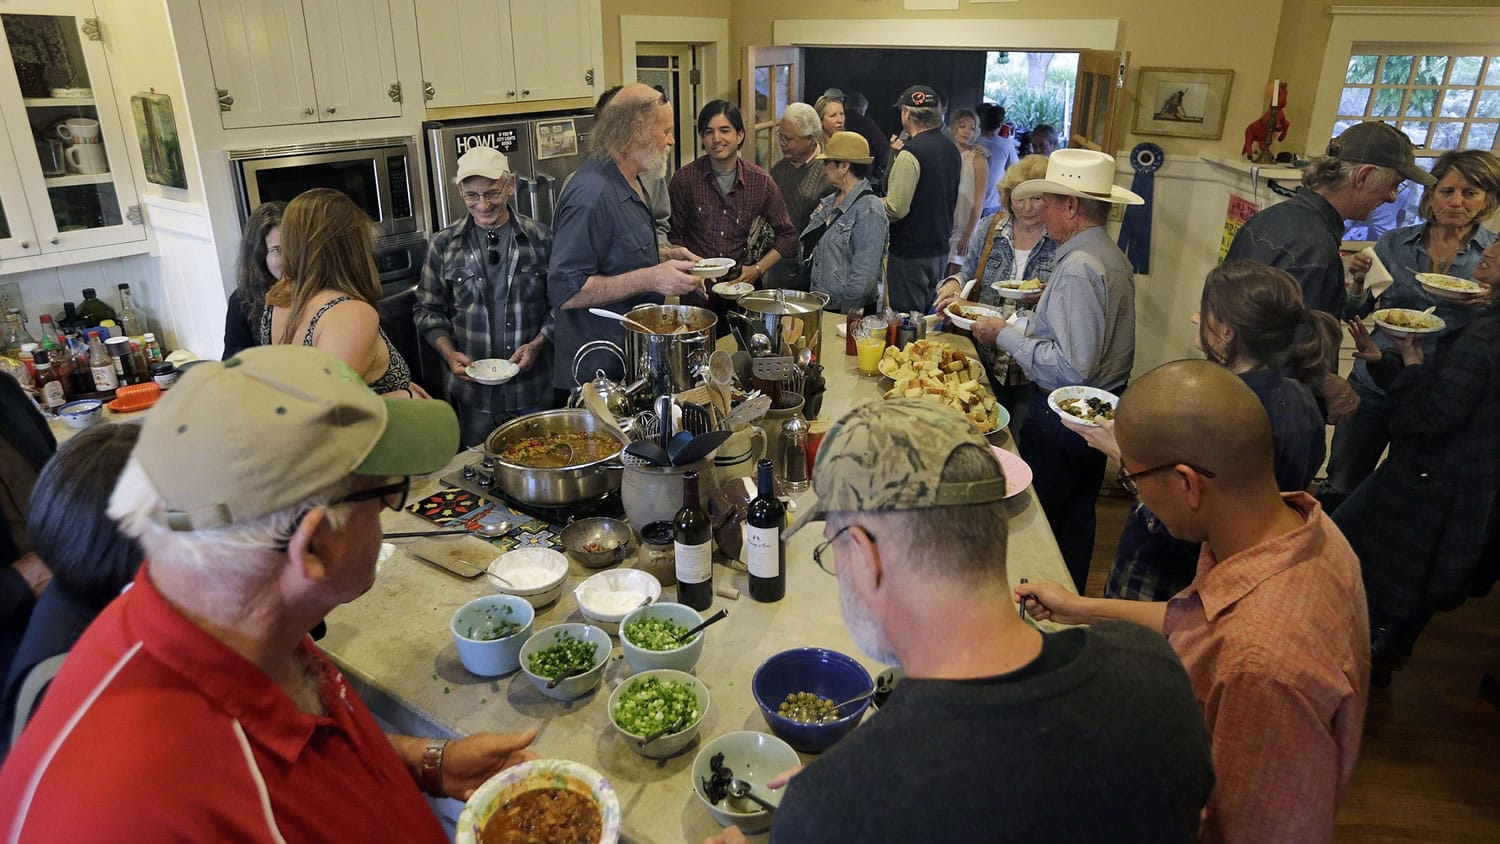 Attendees gather in the kitchen while chili is served after the &quot;Deep End Sessions&quot; concert at David Bunn's ranch house on May 24 in Santa Paula, Calif.